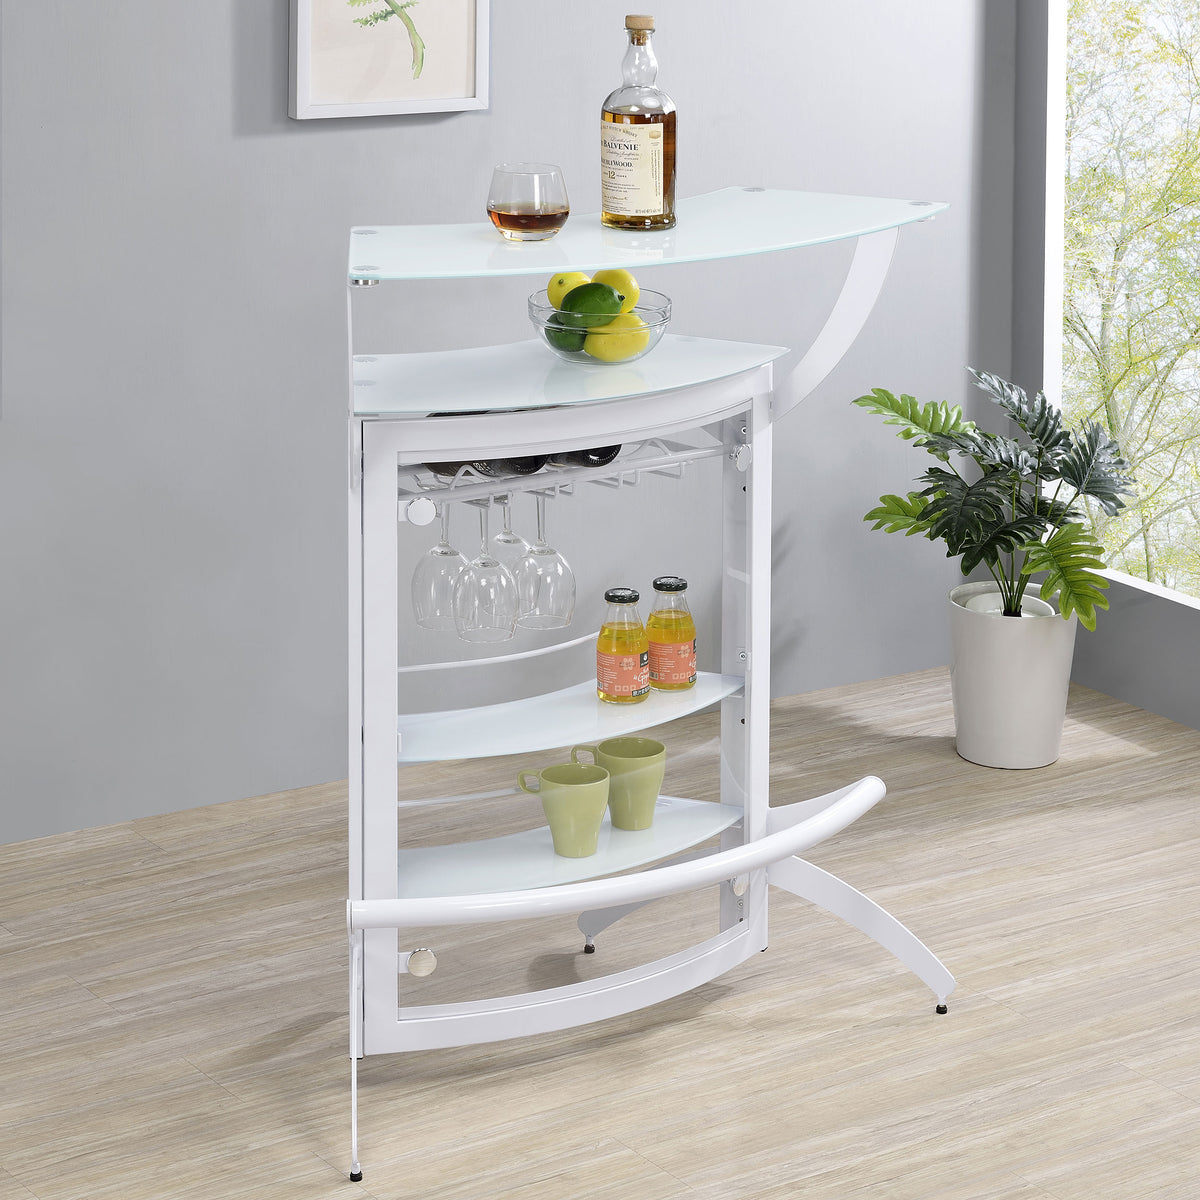 Dallas 2-shelf Home Bar White and Frosted Glass Dallas 2-shelf Home Bar White and Frosted Glass Half Price Furniture